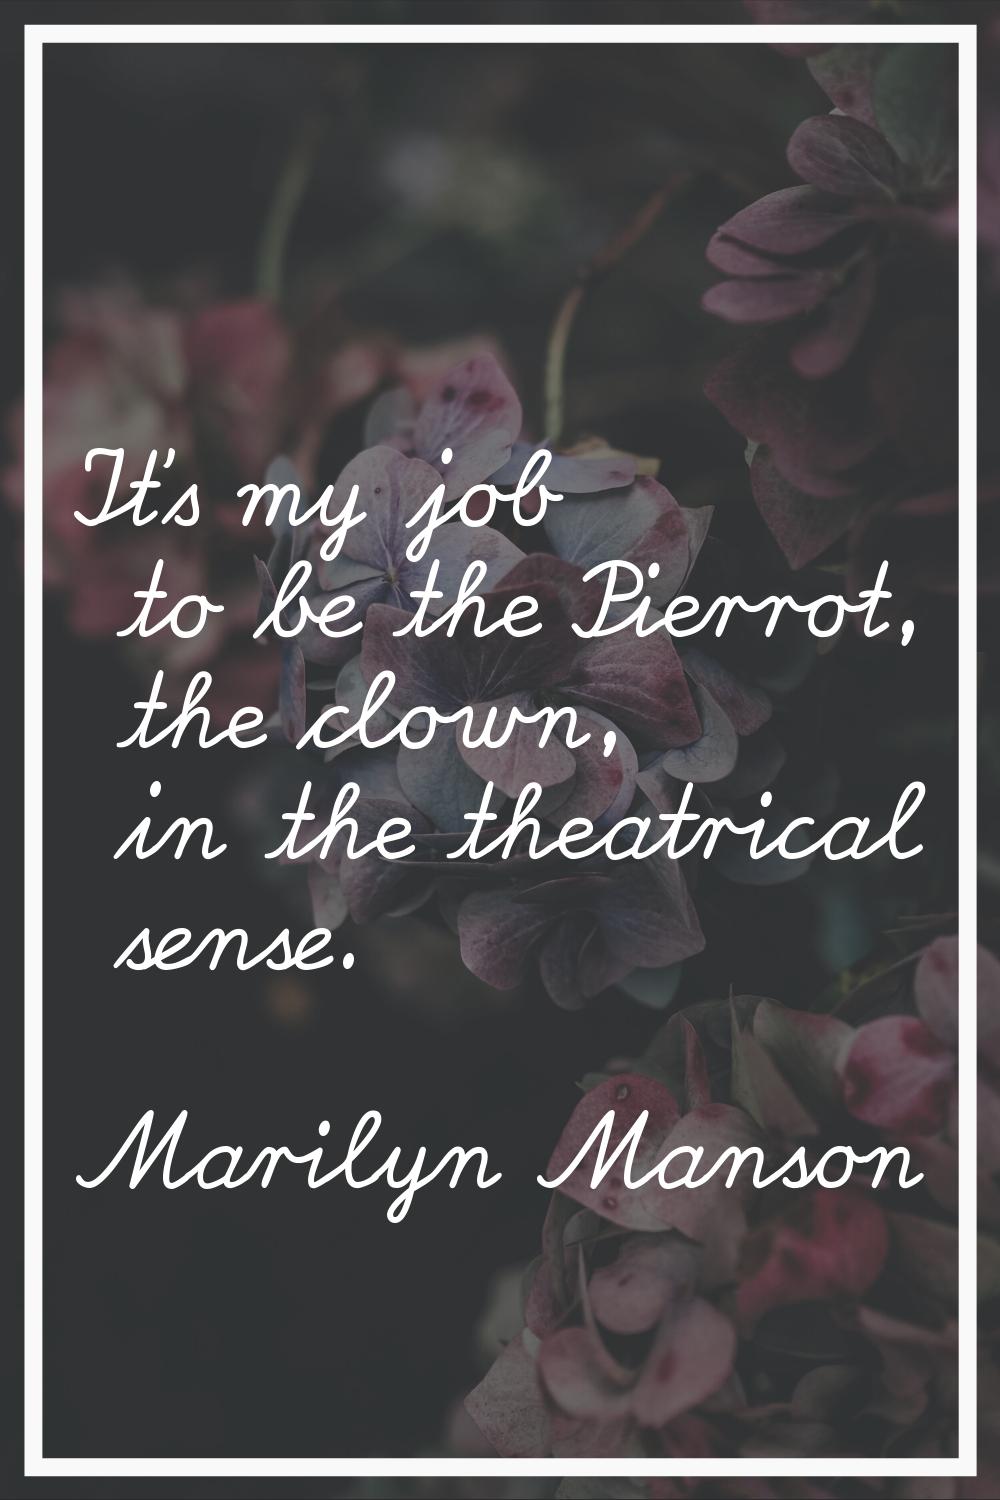 It's my job to be the Pierrot, the clown, in the theatrical sense.